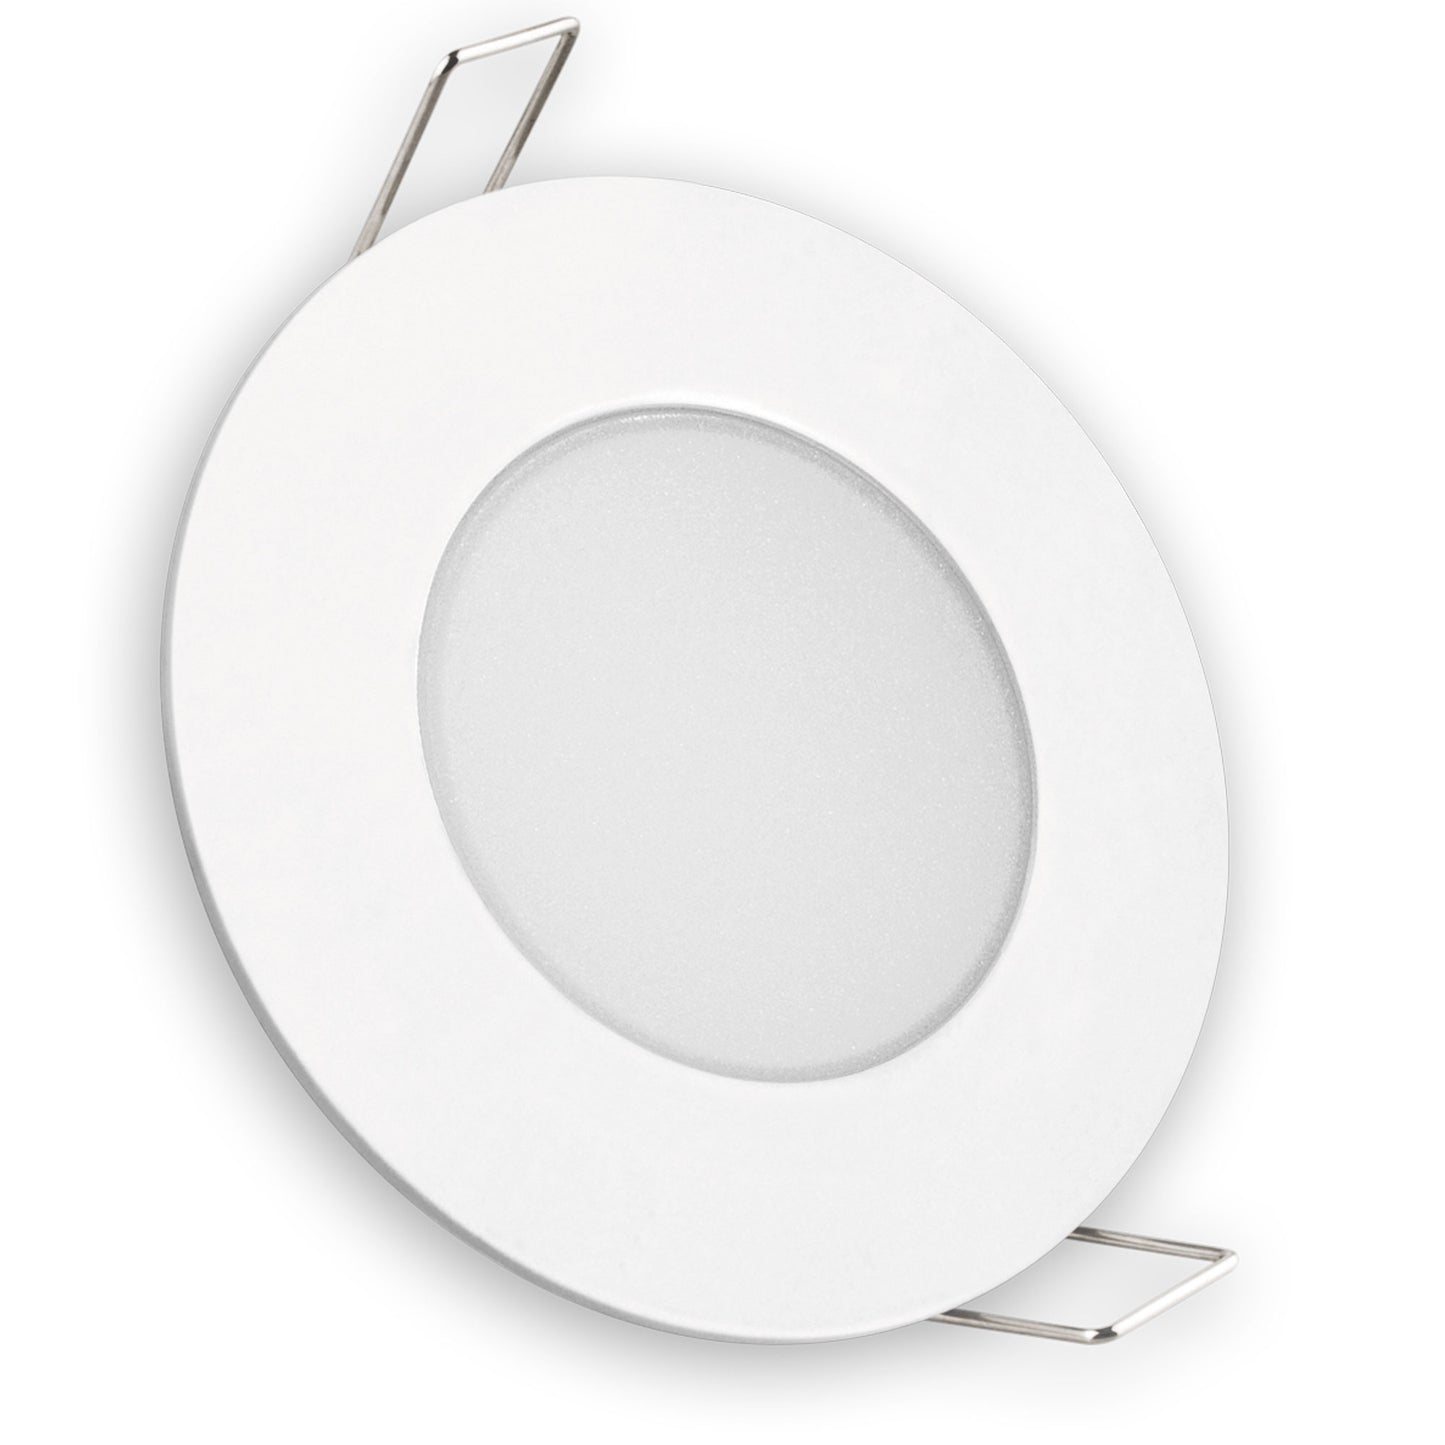 MATEL FIXE IP65 ANNEAU LED ROND BLANC 8W FROID 